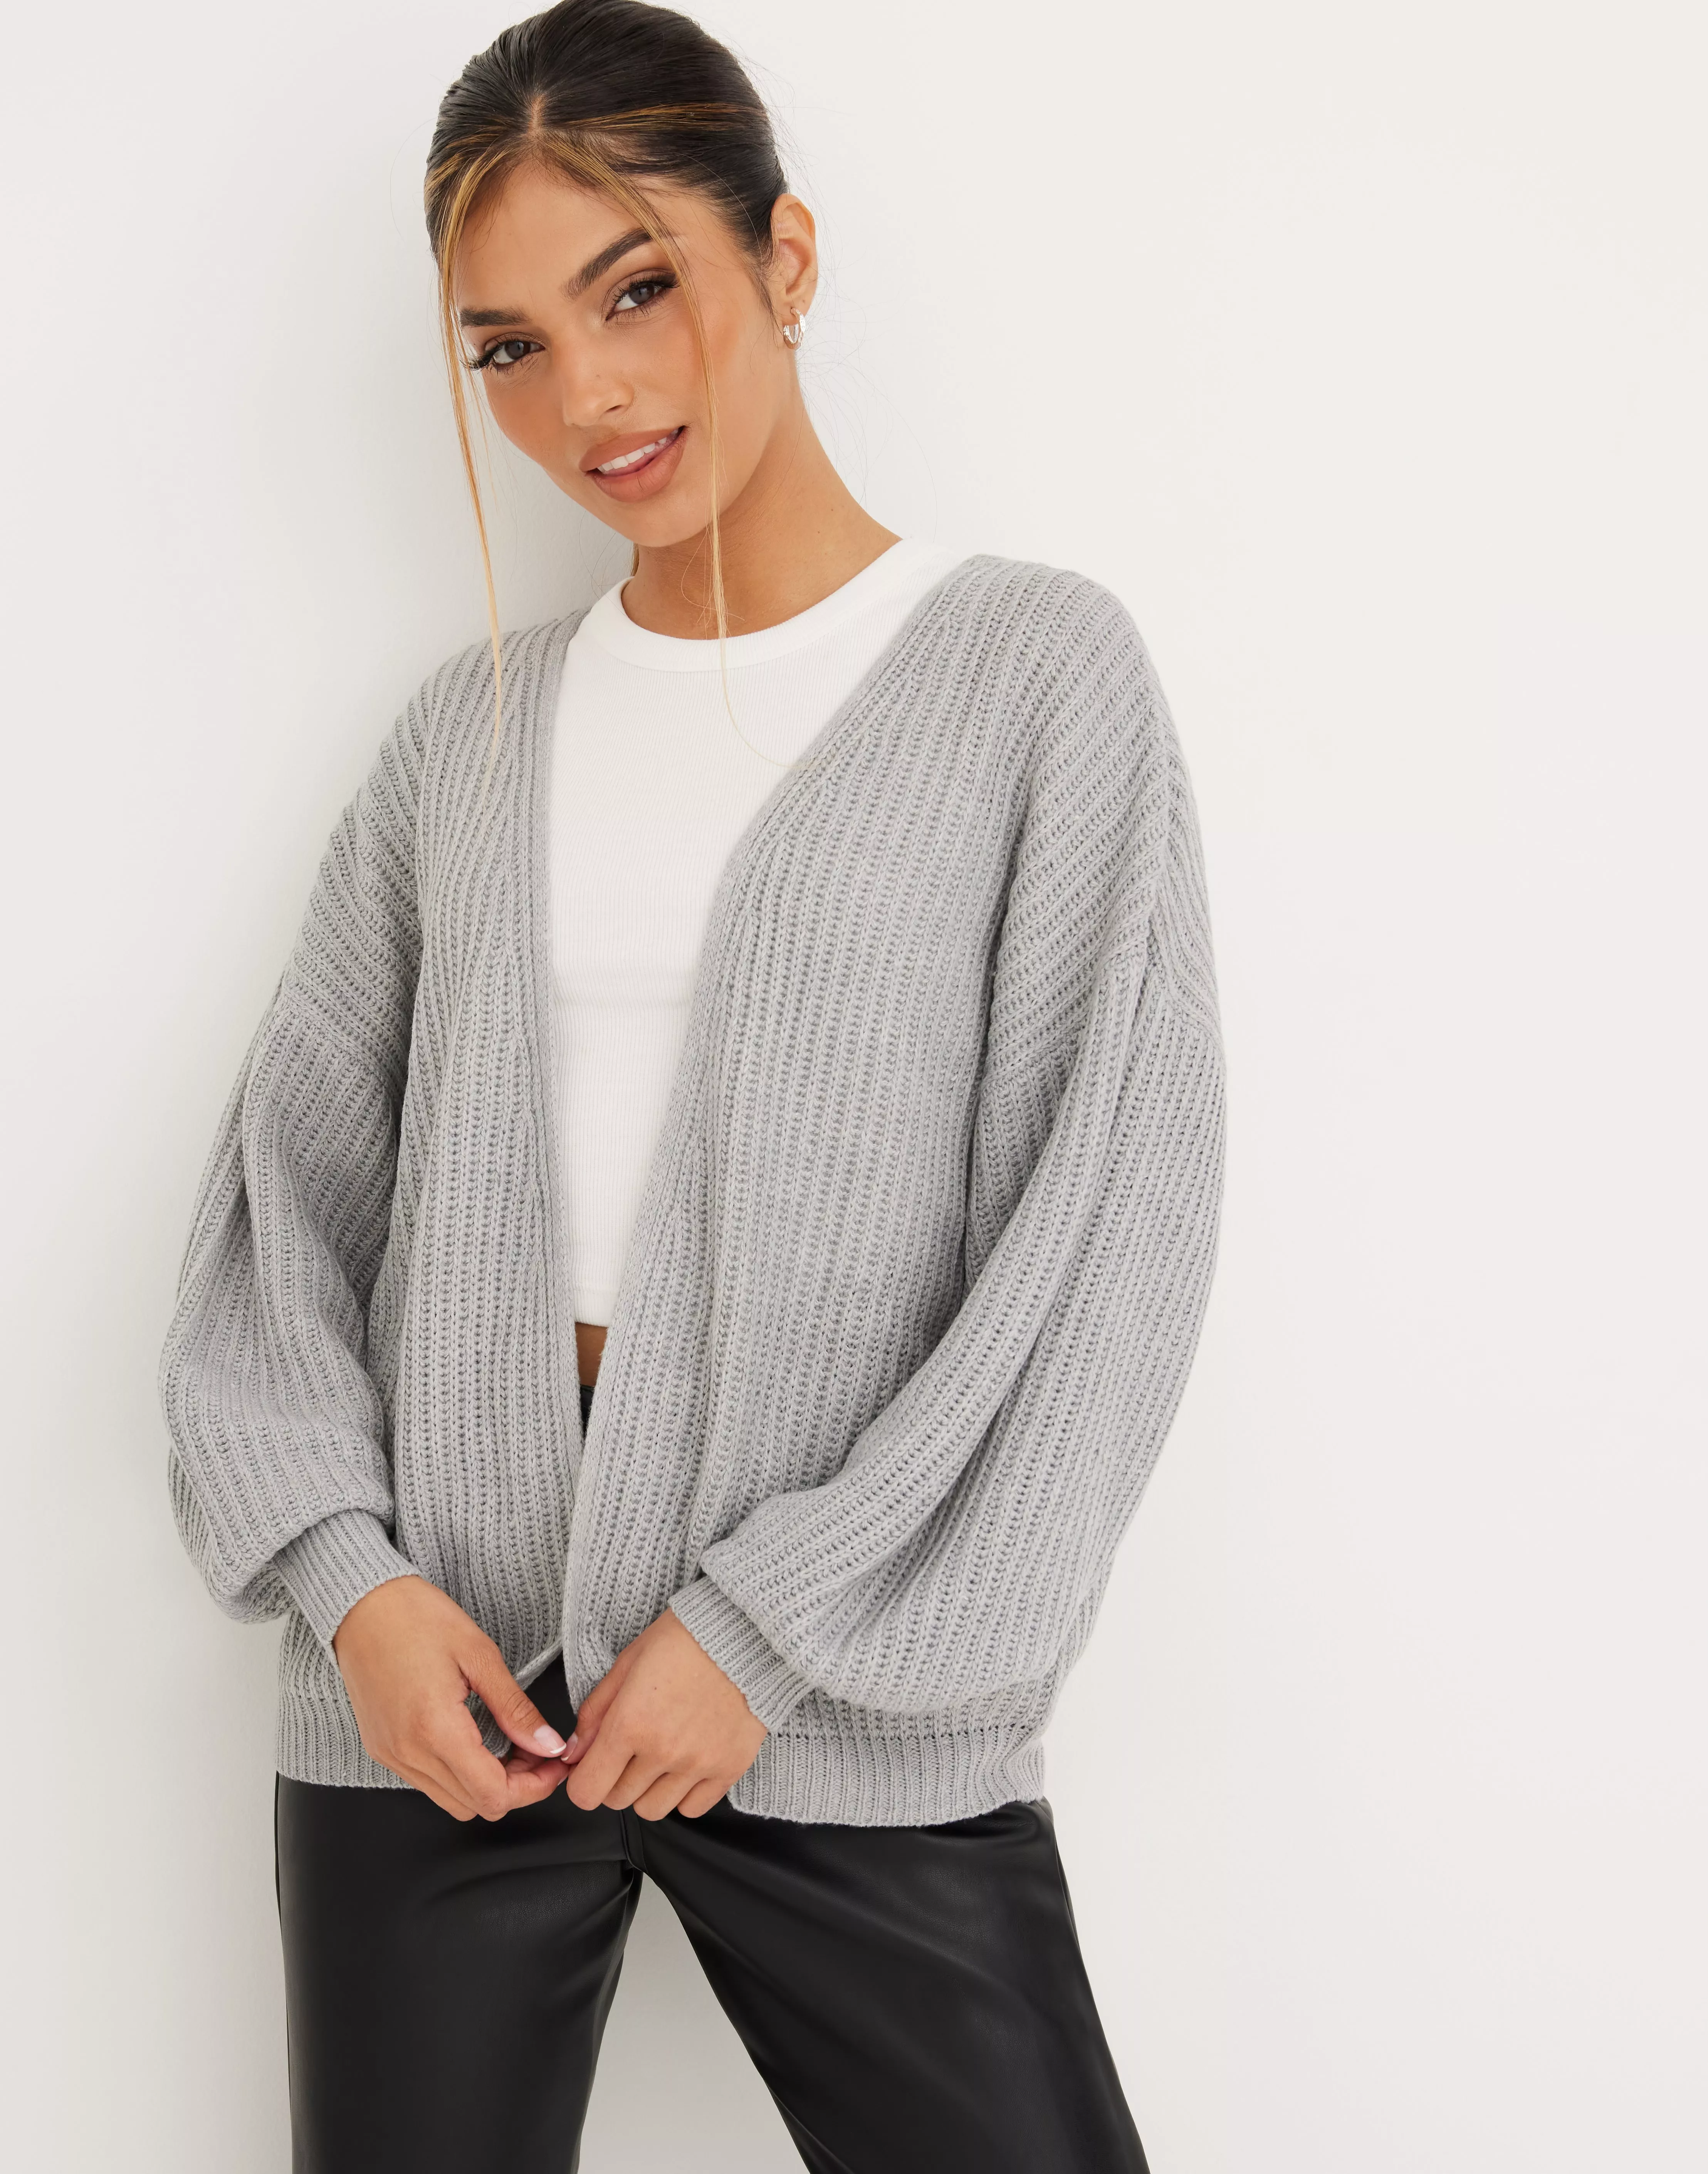 Buy Missguided RECYCLED BATWING CARDIGAN 5GG - Grey